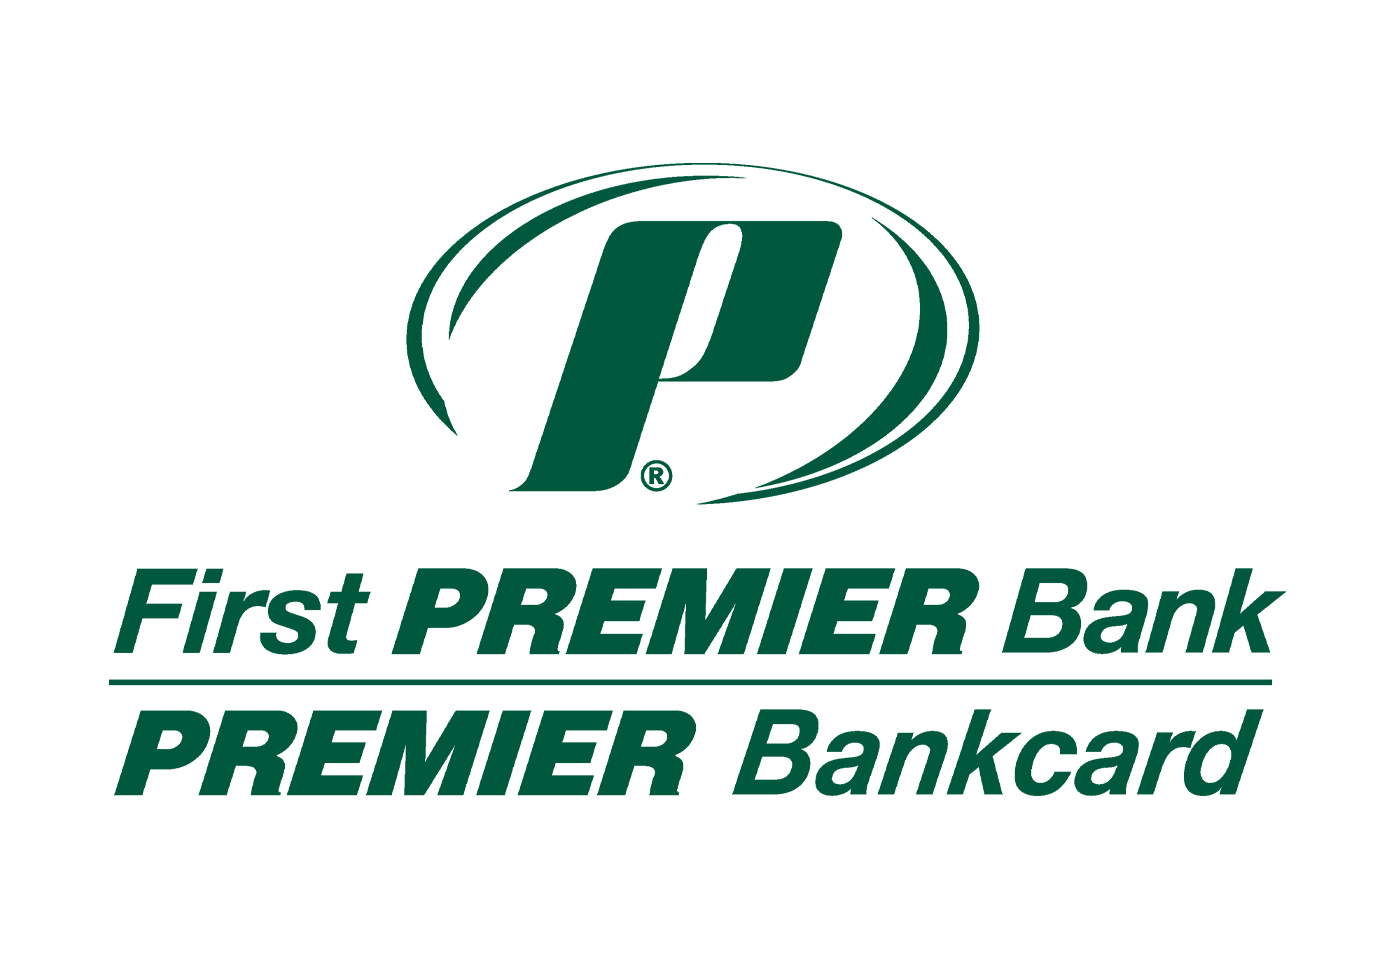 The First Premier Bank Mastercard